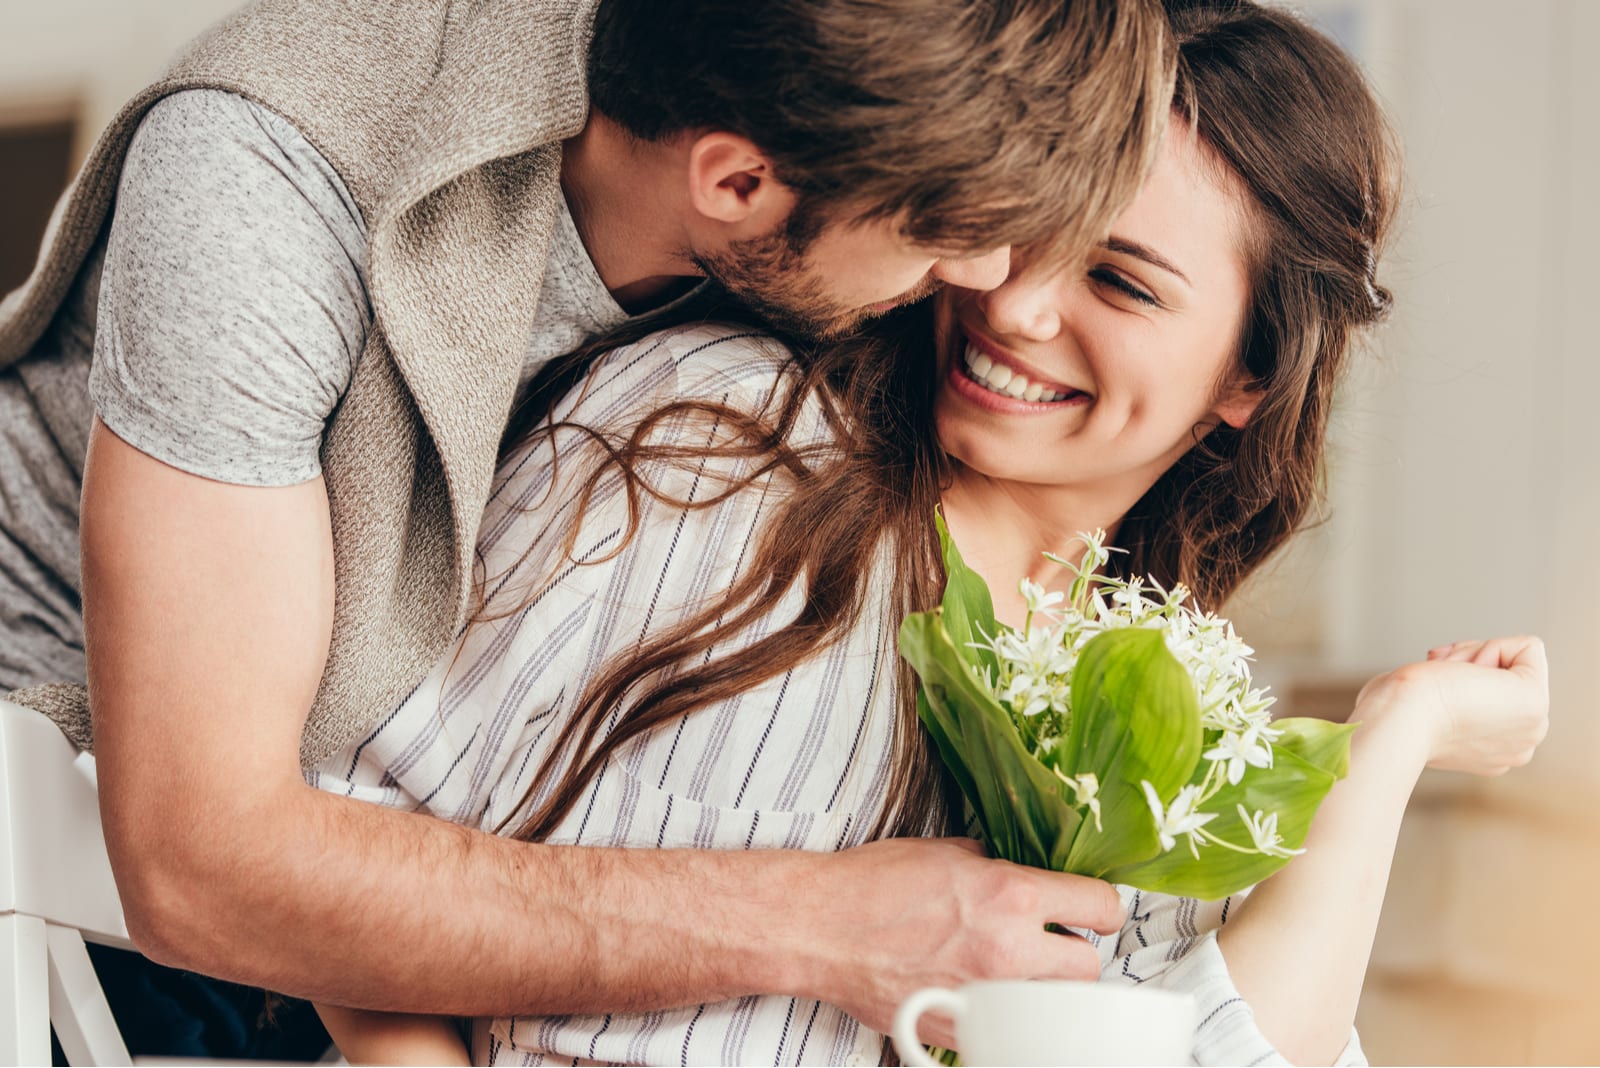 These Are The Most Romantic Things You Can Do For Your Girlfriend